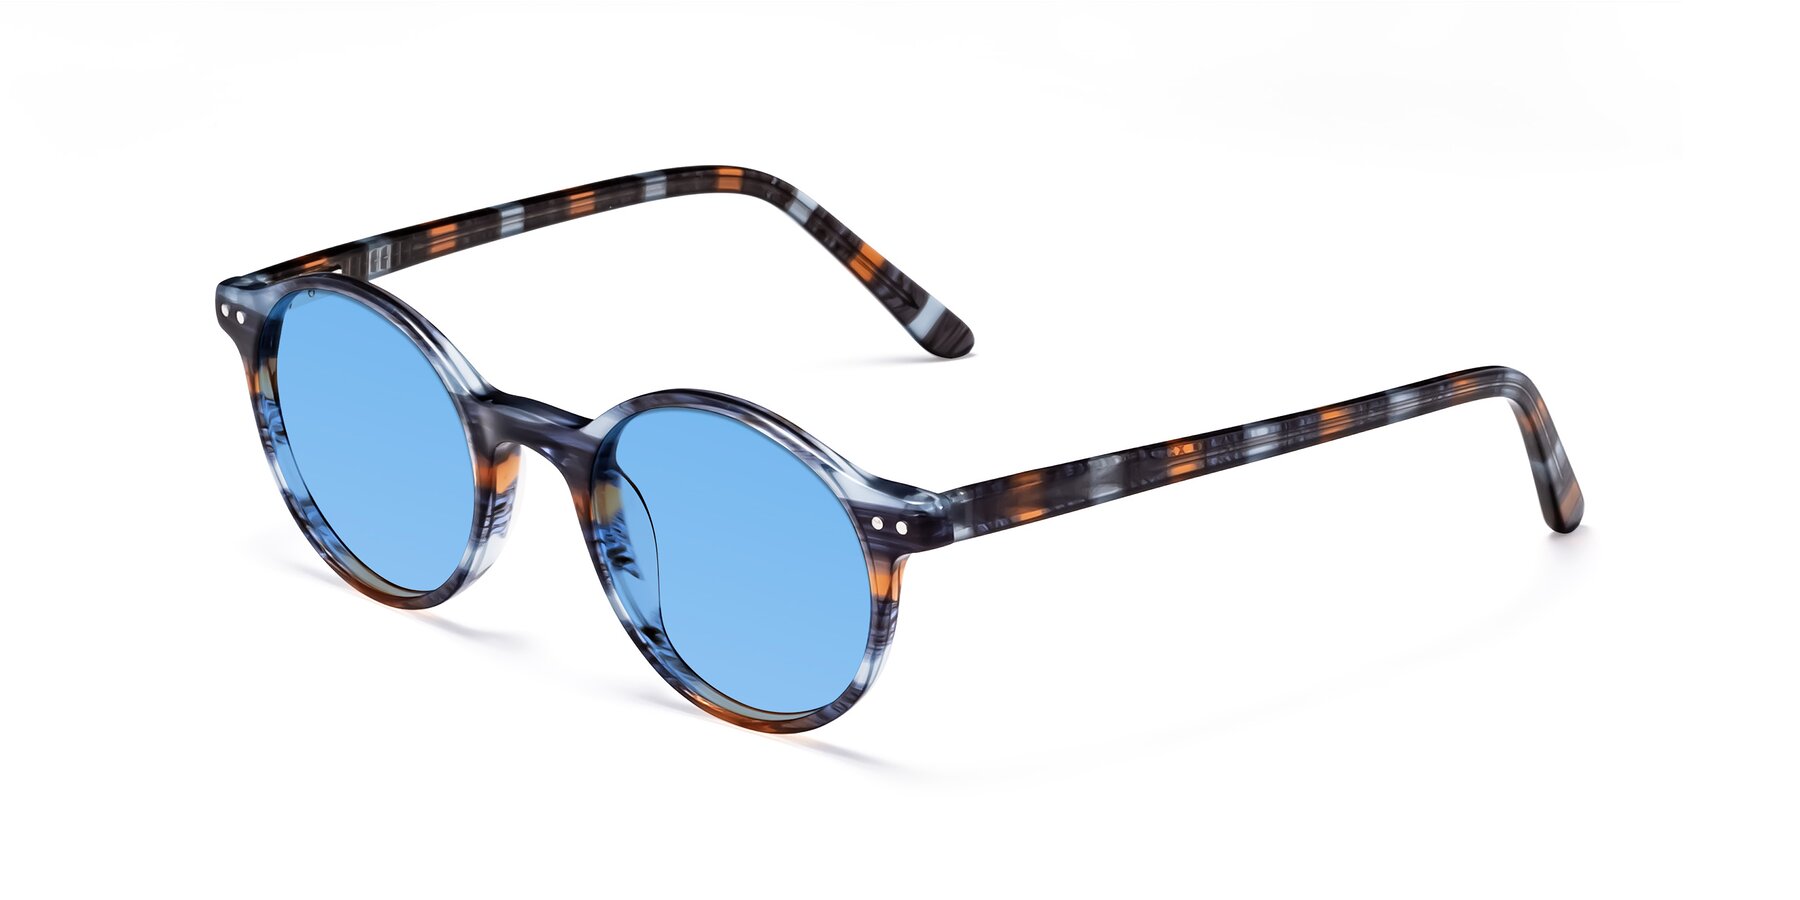 Angle of Jardi in Stripe Blue Brown with Medium Blue Tinted Lenses